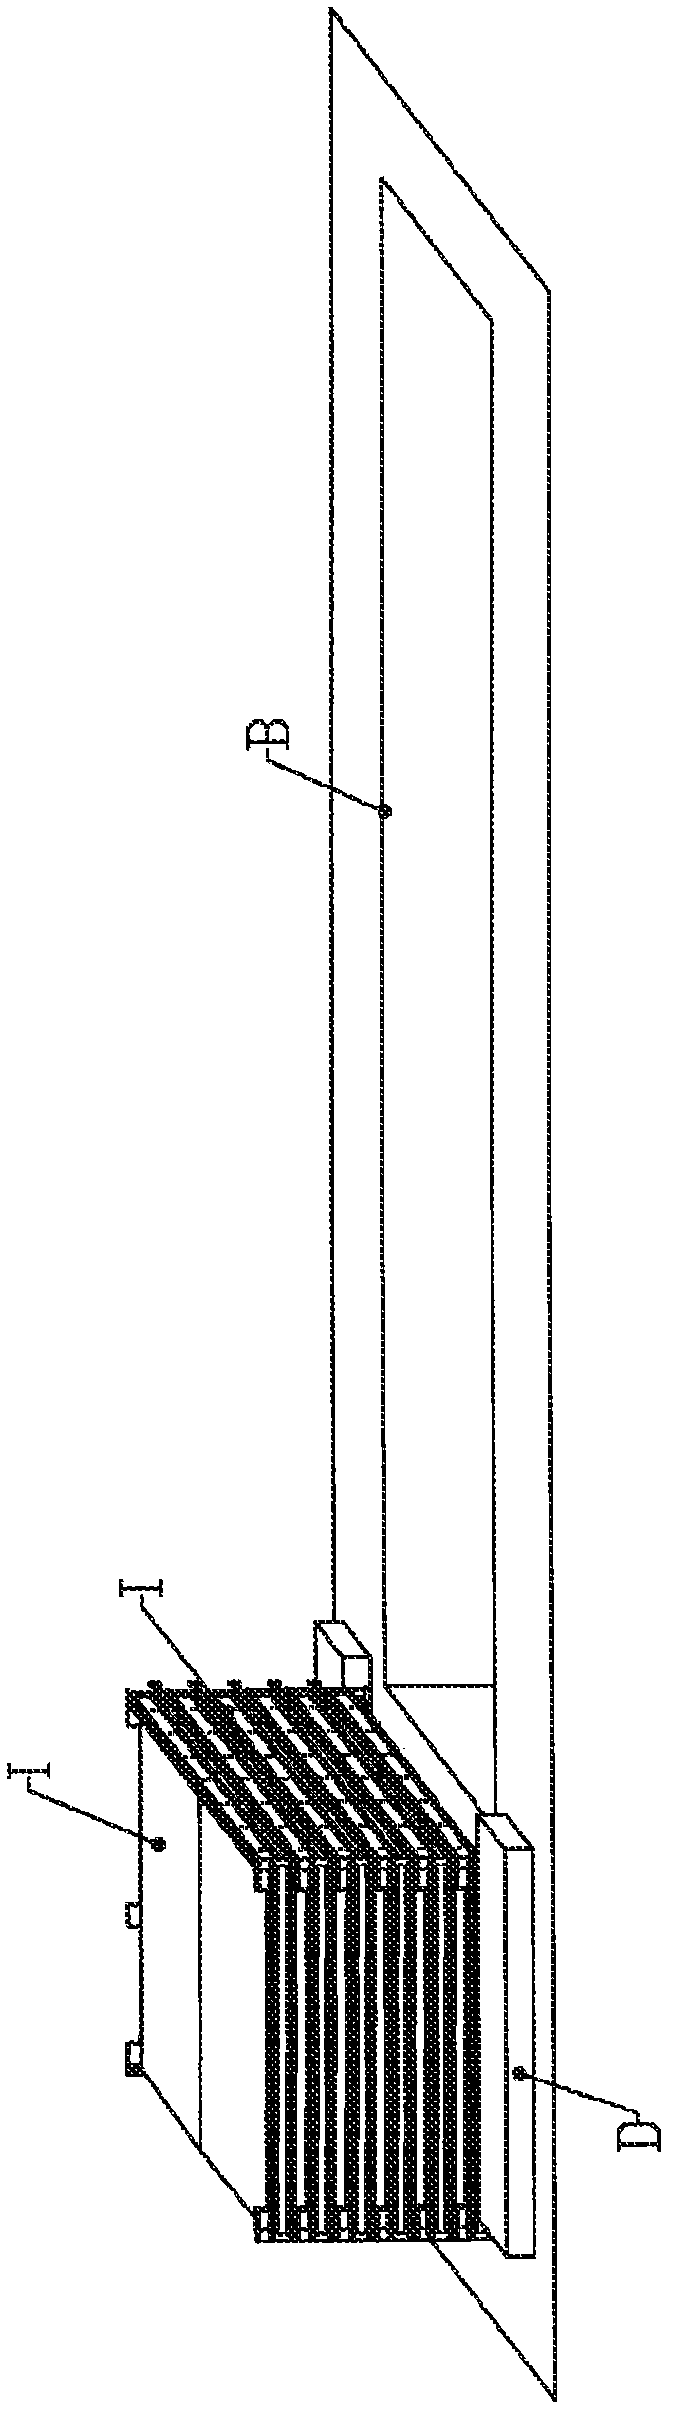 Basin covering device